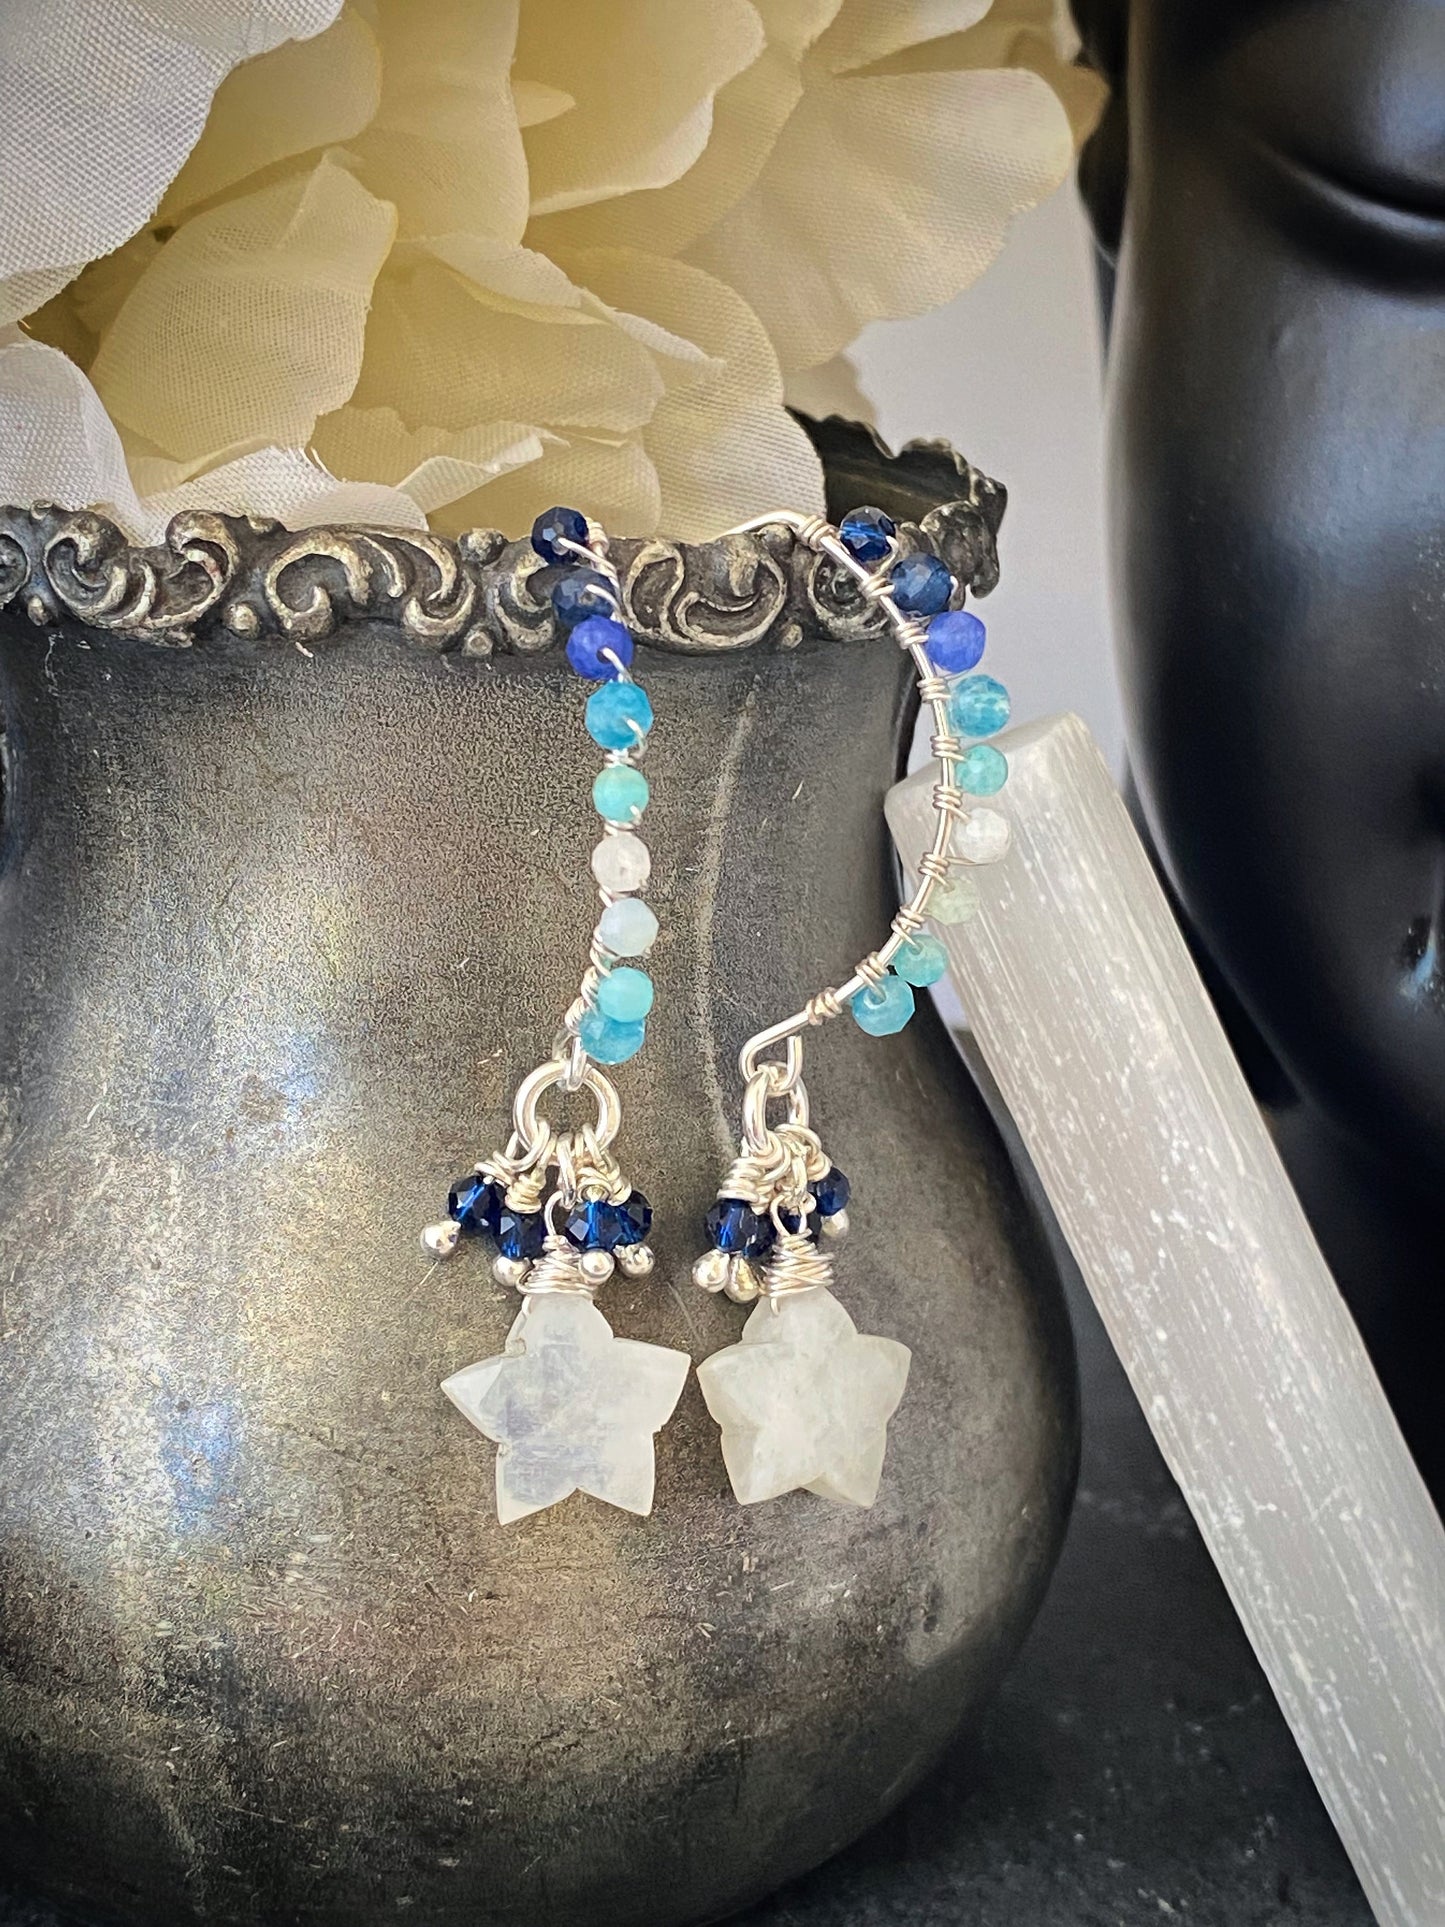 Moonstone Stars. Moonstone and mixed blue stones and silver metal earrings - Andria Bieber Designs 